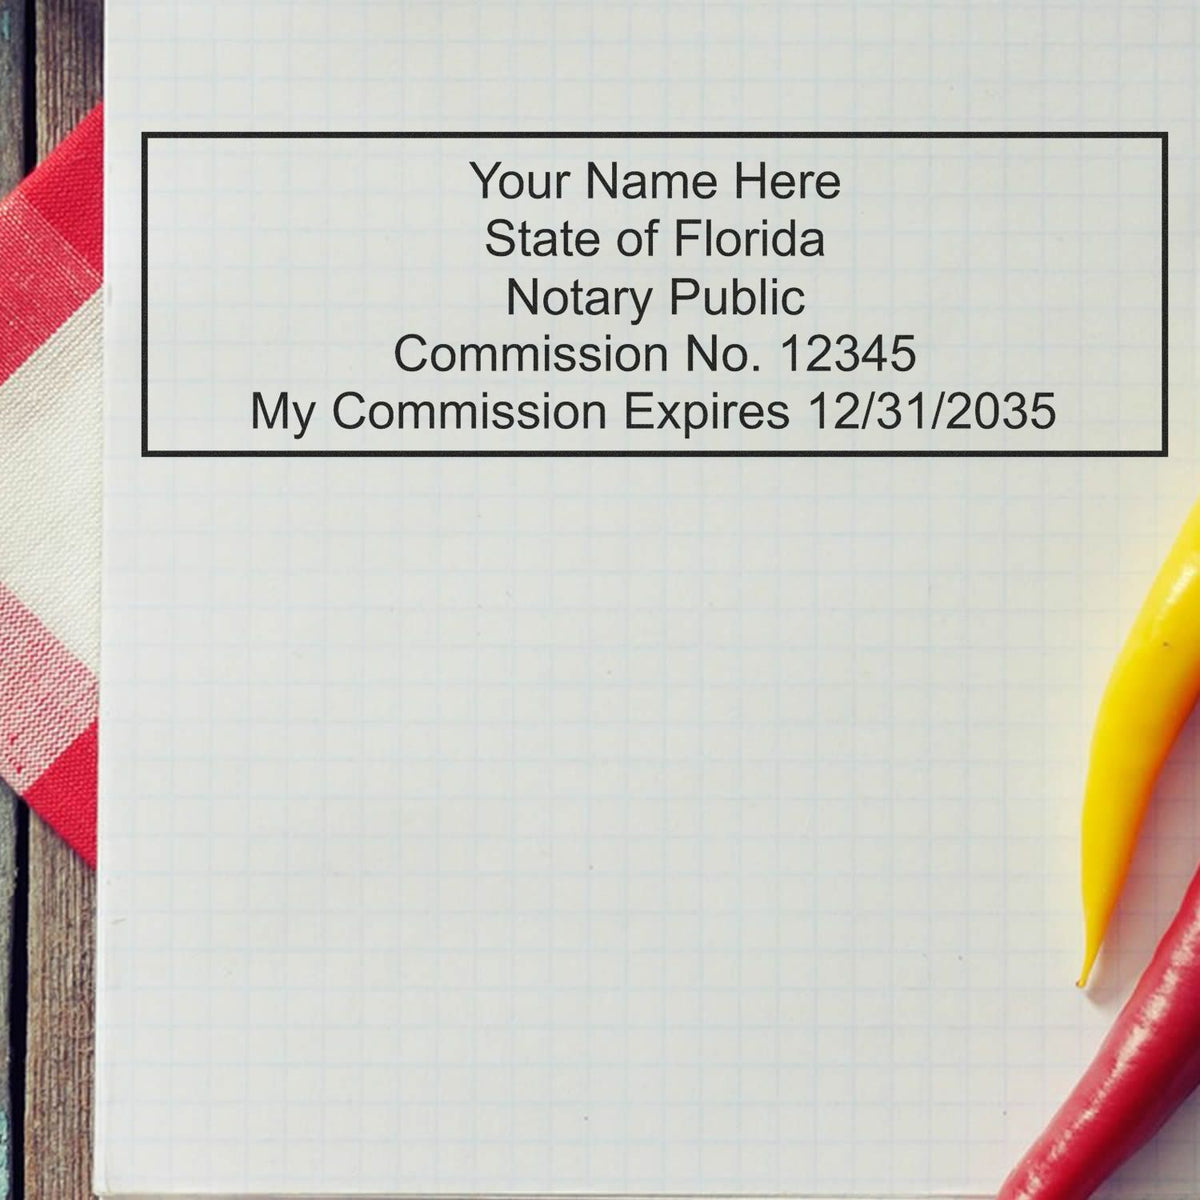 A stamped impression of the PSI Florida Notary Stamp in this stylish lifestyle photo, setting the tone for a unique and personalized product.